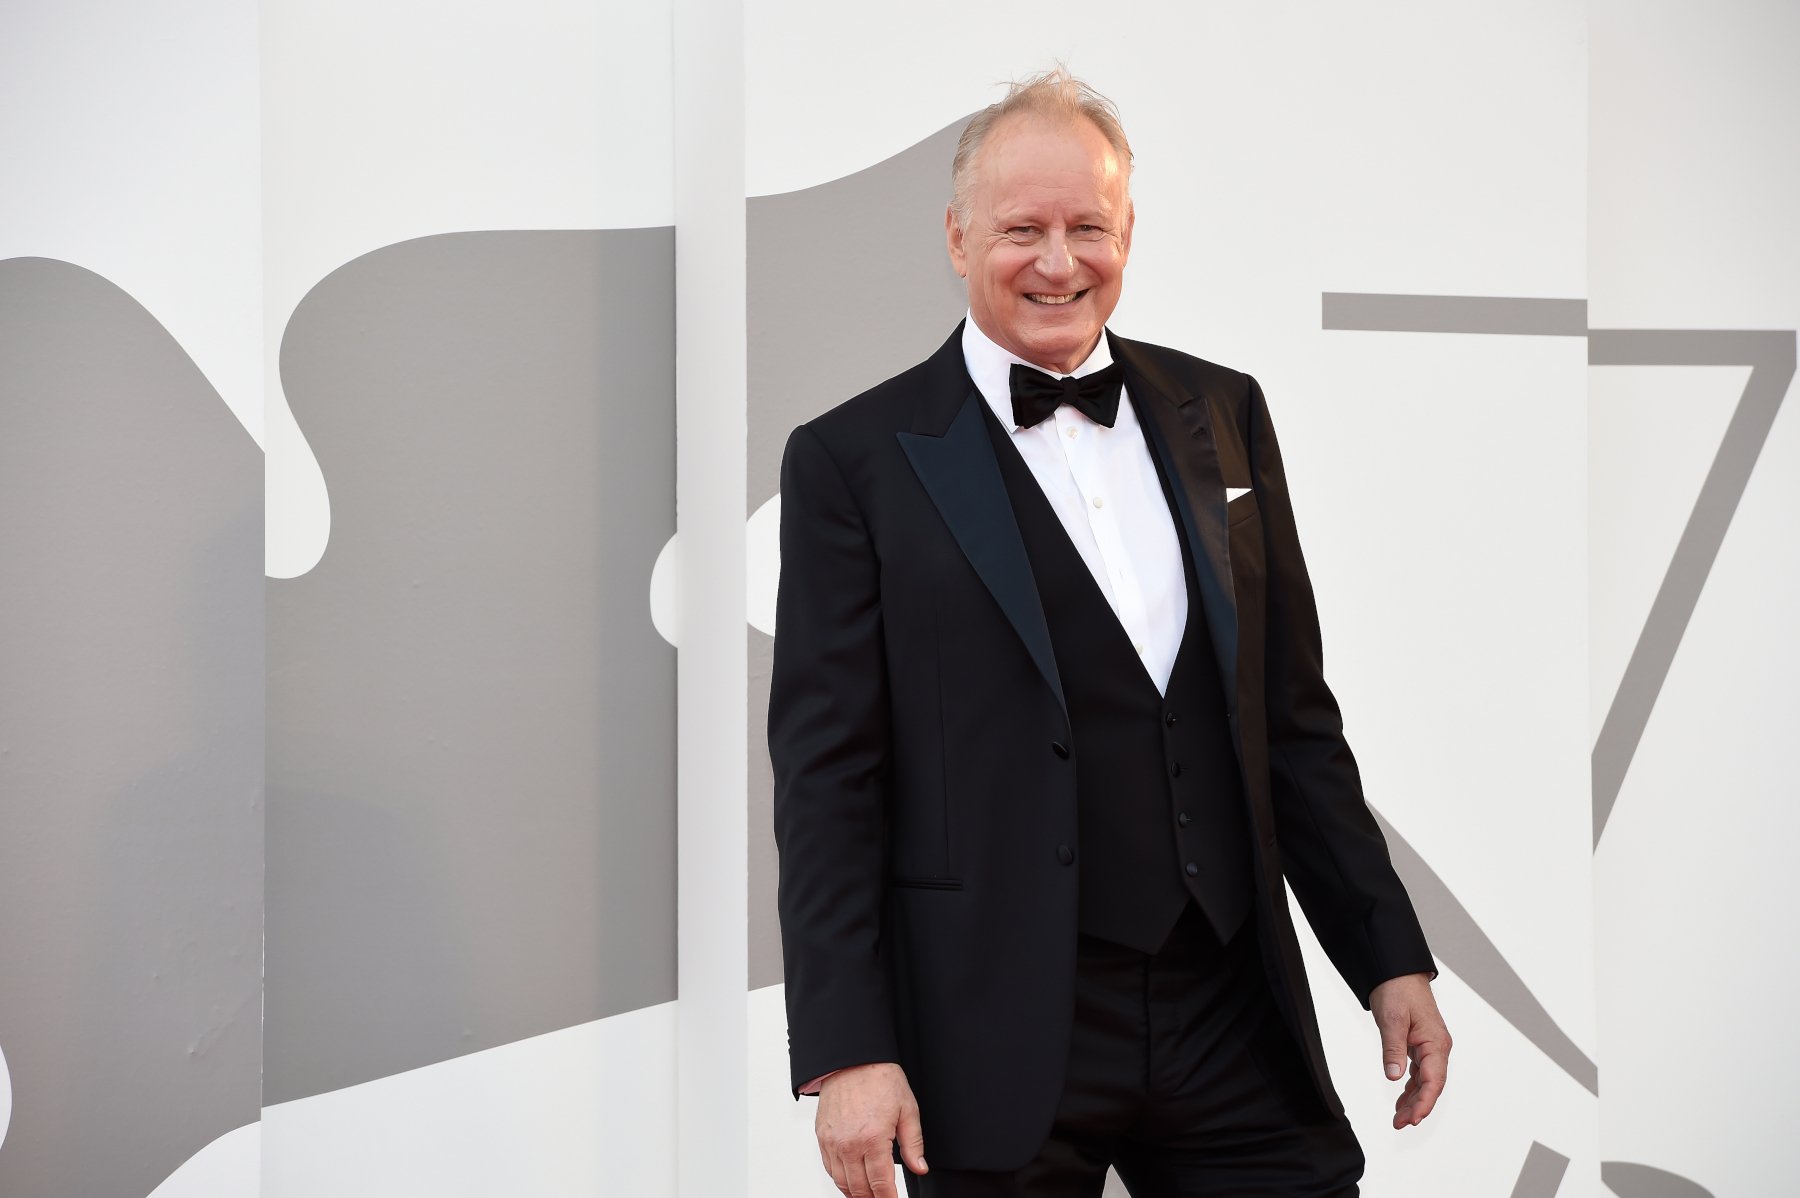 Actor Stellan Skarsgård who plays Luthen Rael in Andor. In the photo he is wearing a white shirt, black suit and black bow tie.